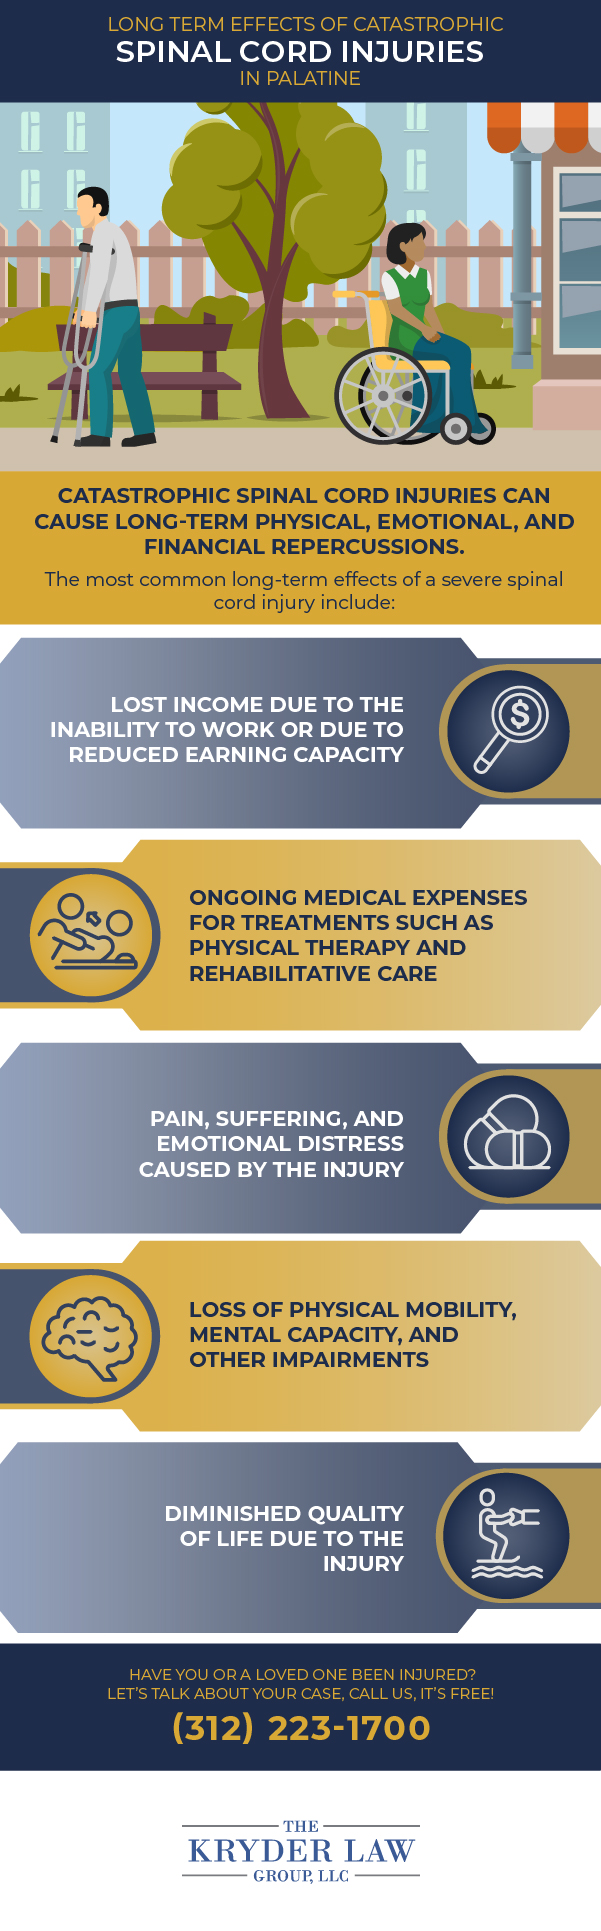 Long Term Effects of Catastrophic Spinal Cord Injuries in Palatine Infographic